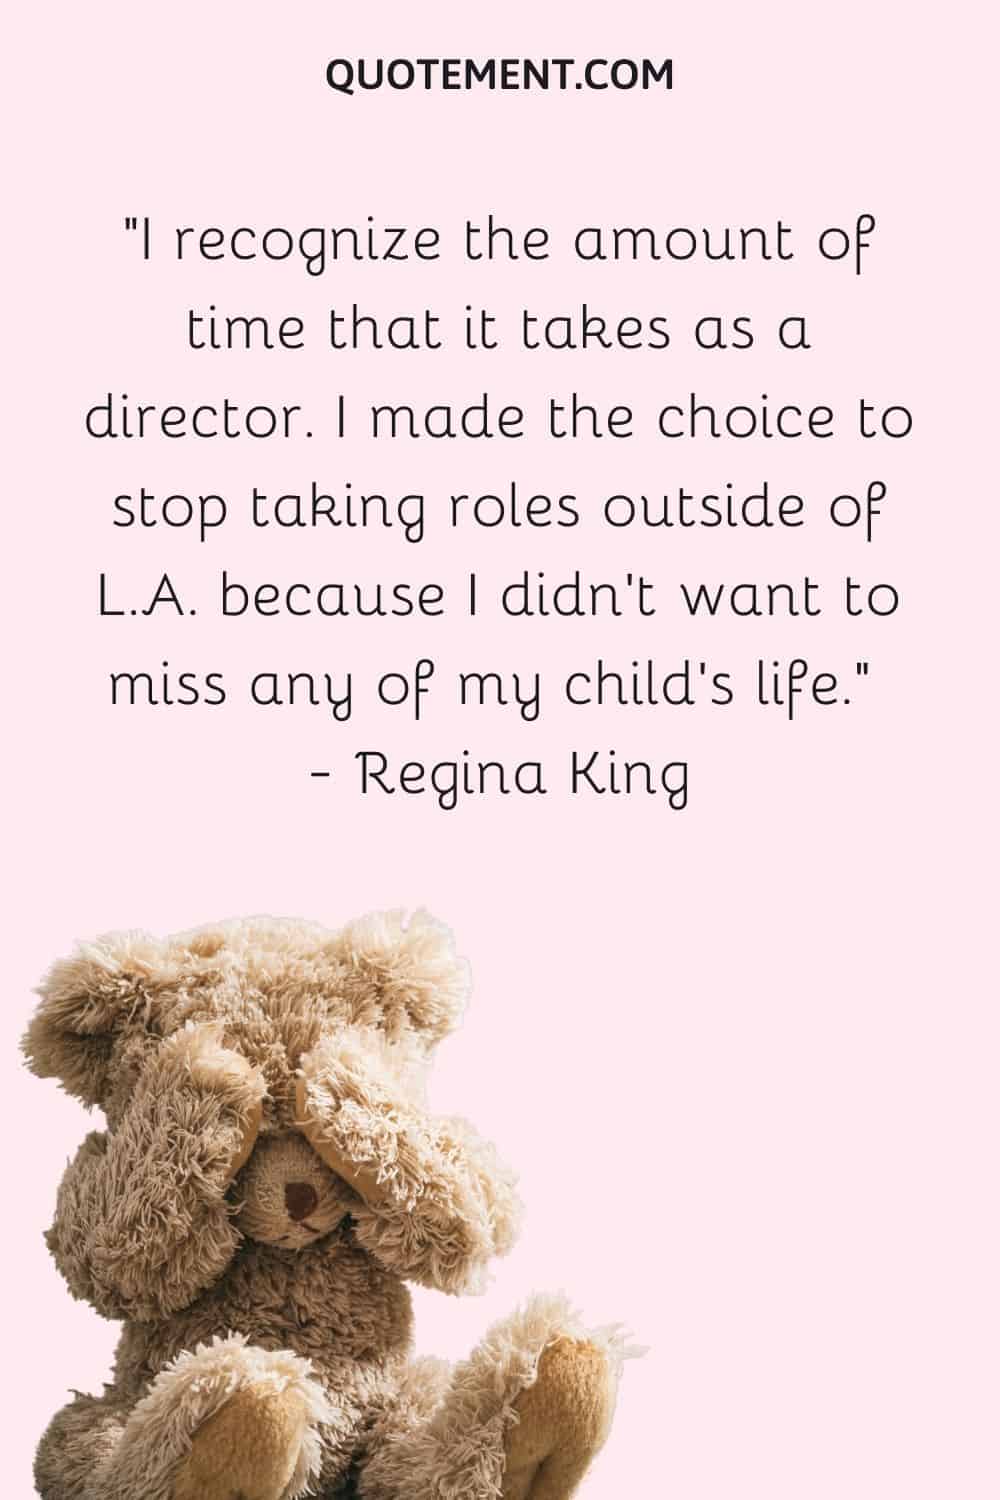 I recognize the amount of time that it takes as a director. I made the choice to stop taking roles outside of L.A.